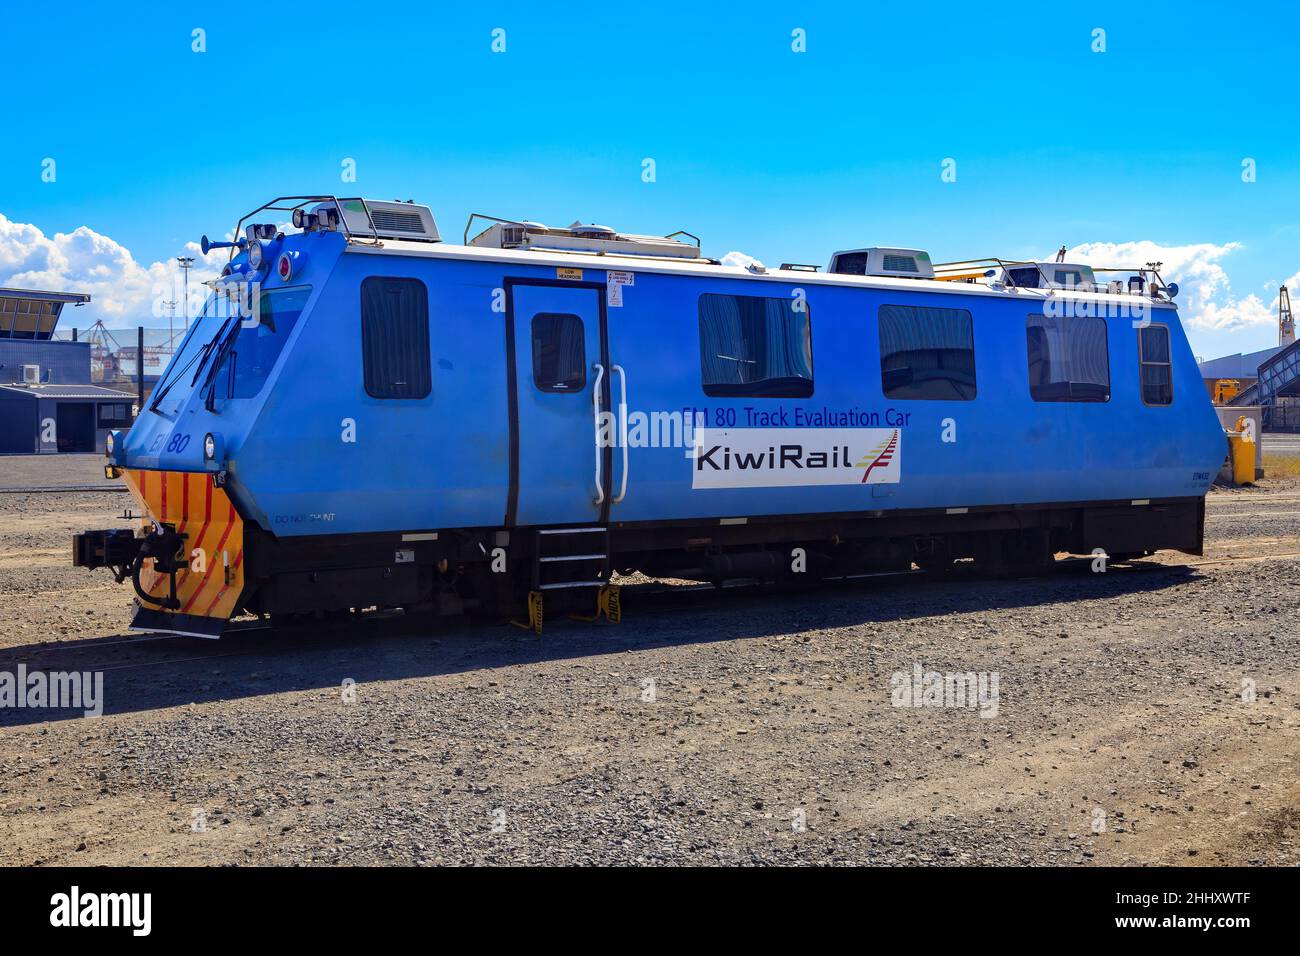 A KiwiRail EM80 track evaluation car parked in a railway station in Mount Maunganui, New Zealand Stock Photo